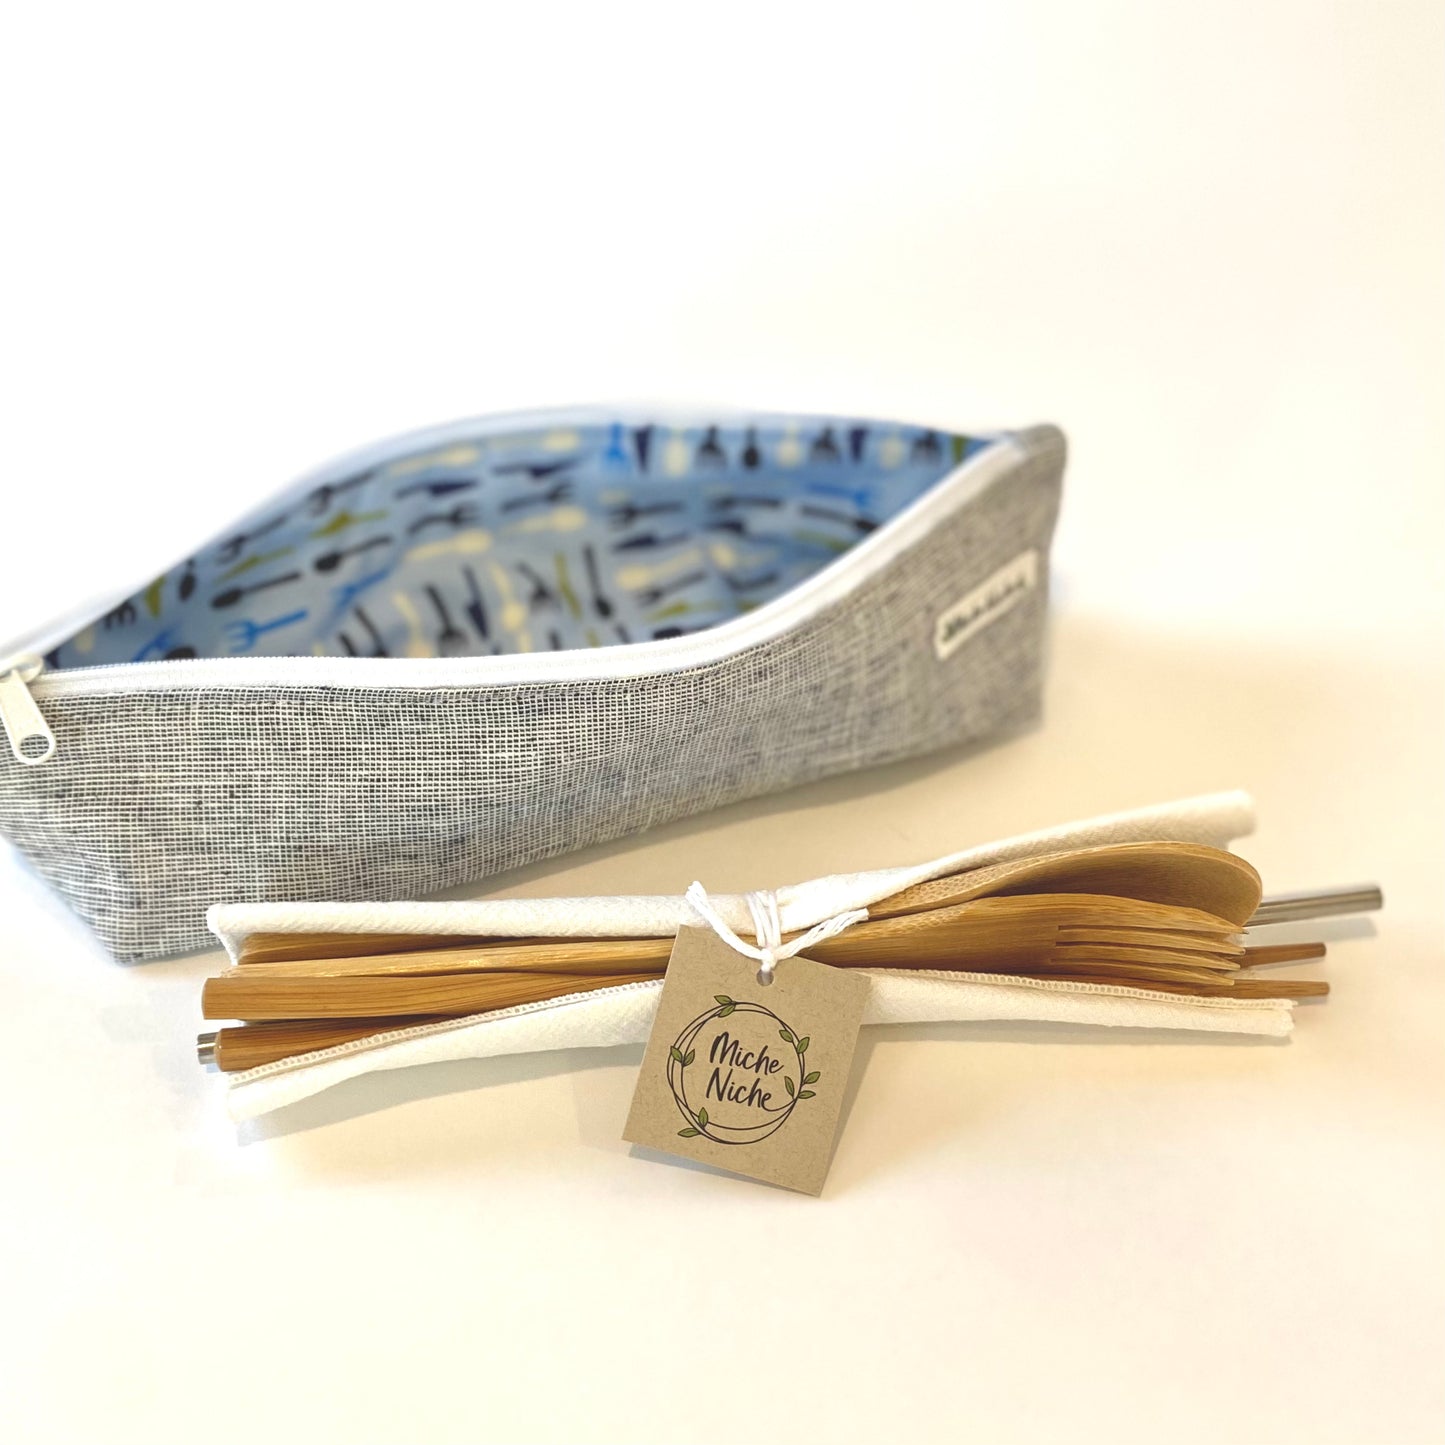 On-the-go Cutlery Pouch | Bamboo Cutlery | Eco-friendly gift idea